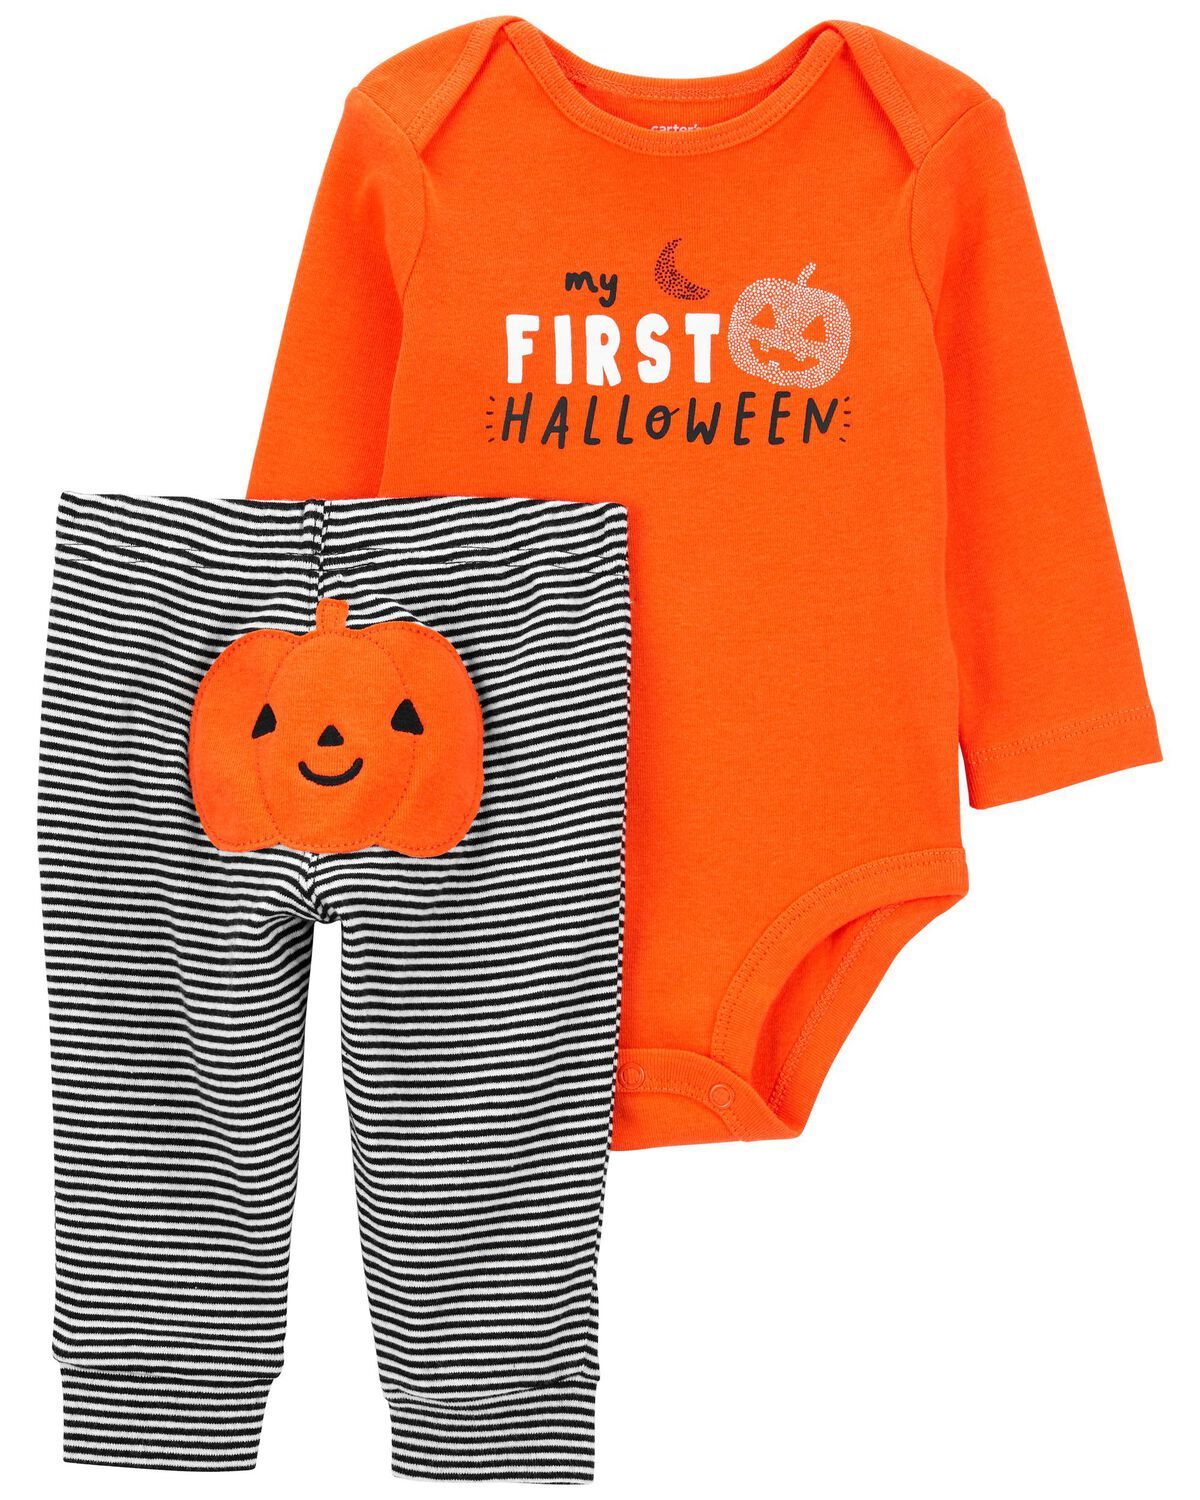 Orange/Black Baby 2-Piece My First Halloween Outfit | carters.com | Carter's